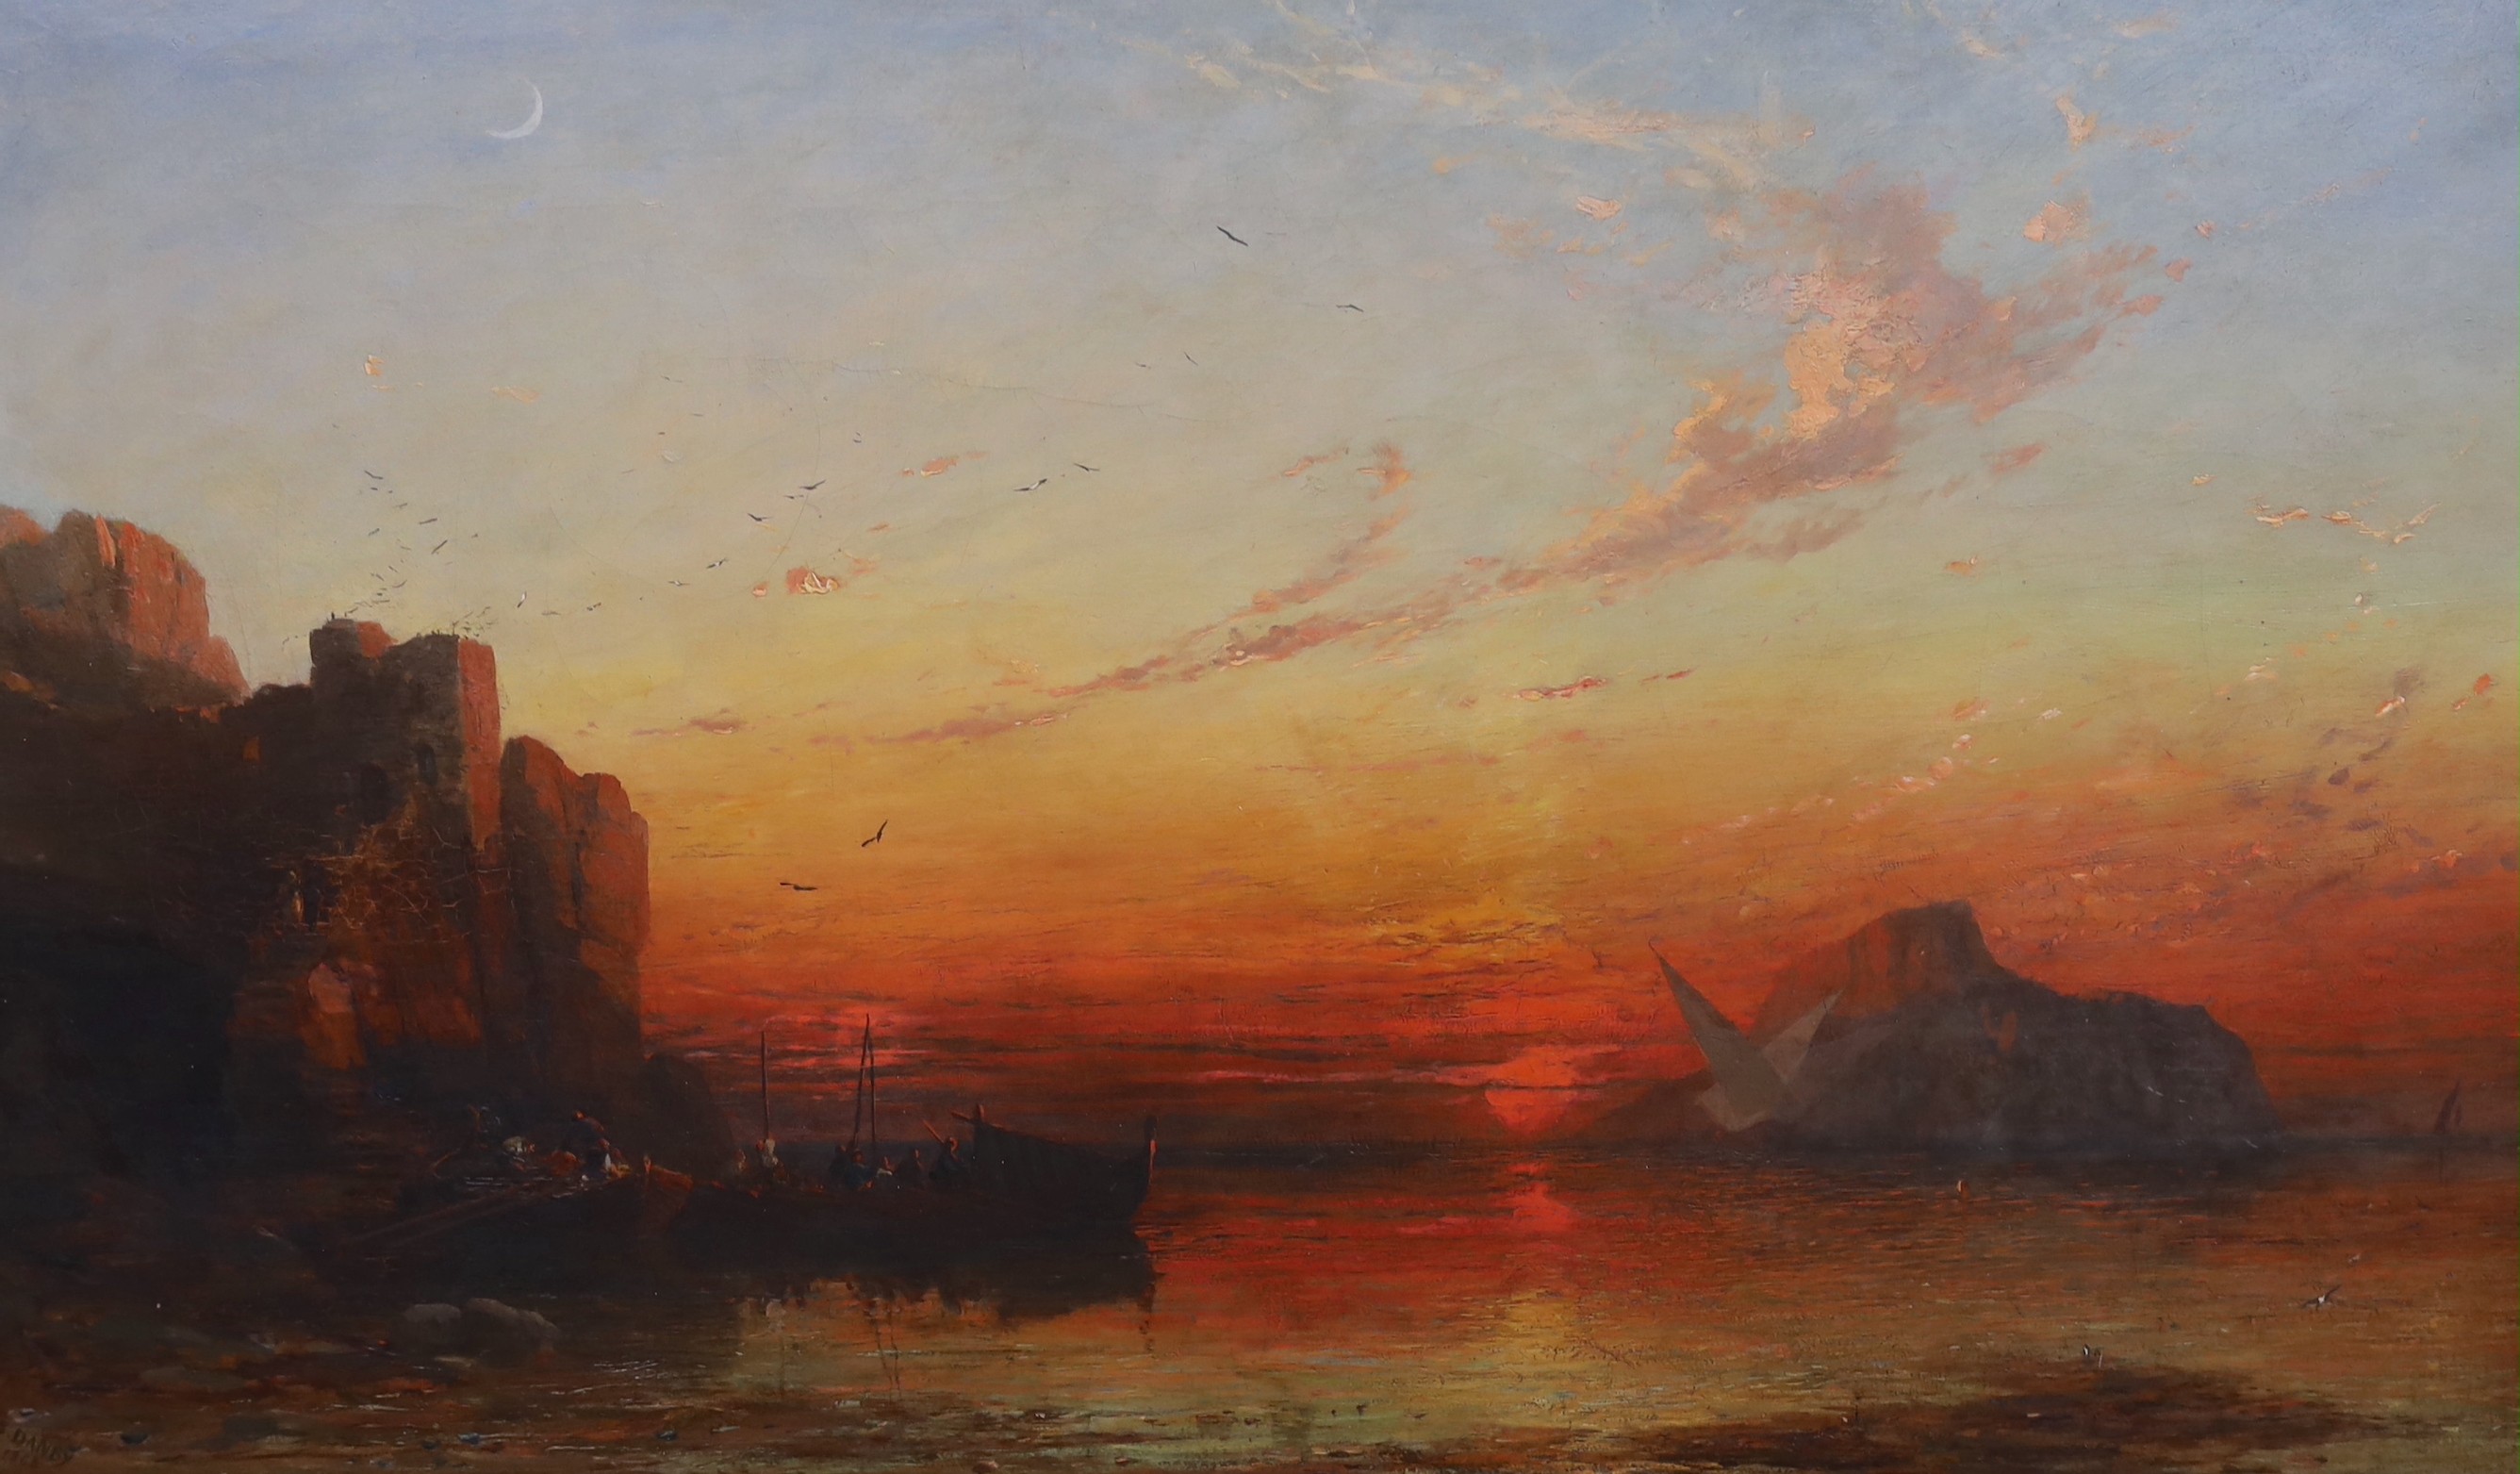 James Francis Danby (British, 1816-1875), Boatmen along the Aegean coast at sunset, oil on canvas, 45 x 75cm